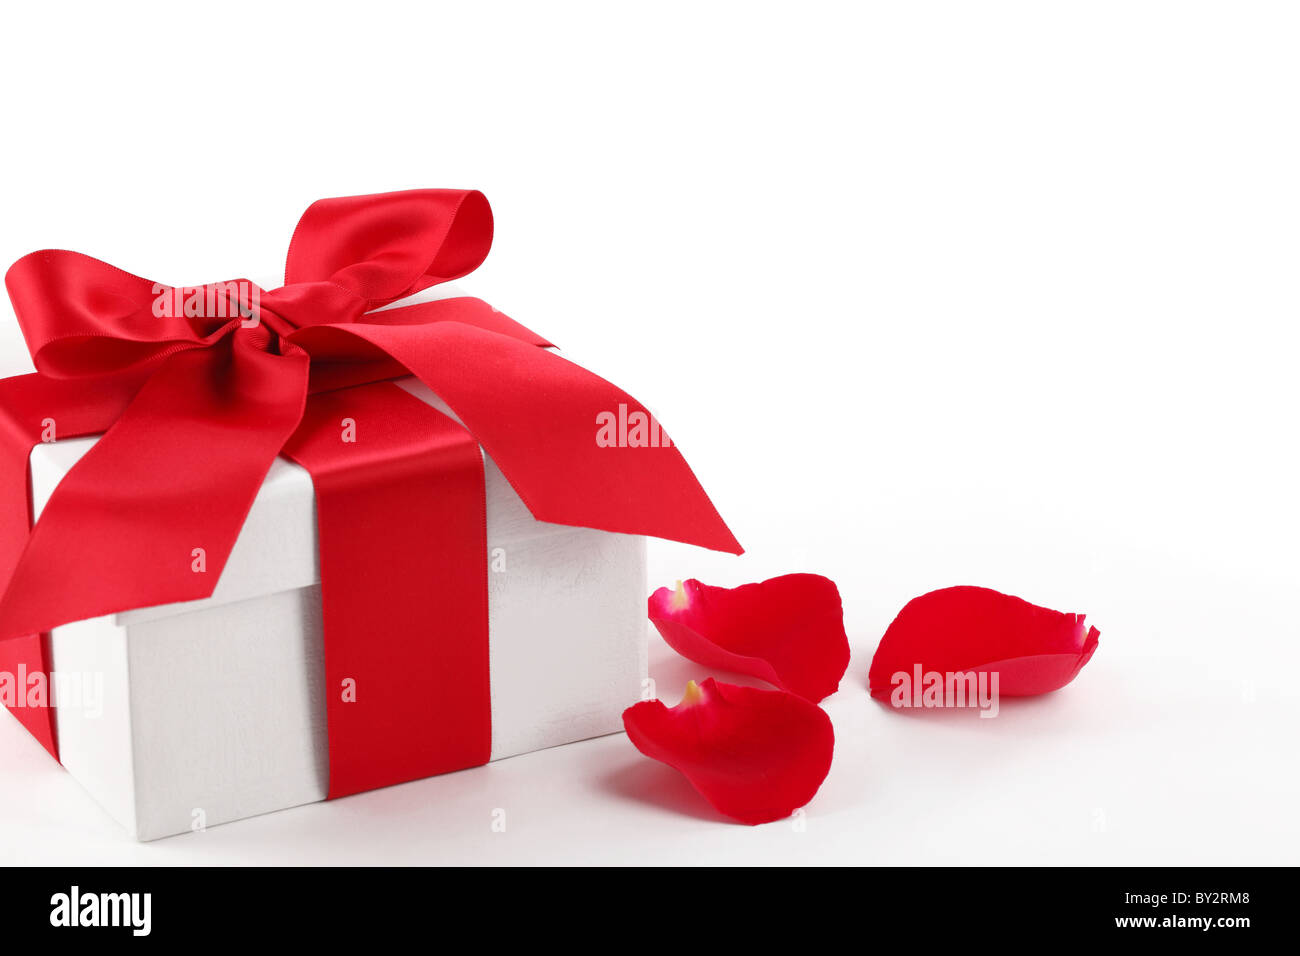 Gift box and rose petal on white background. Stock Photo